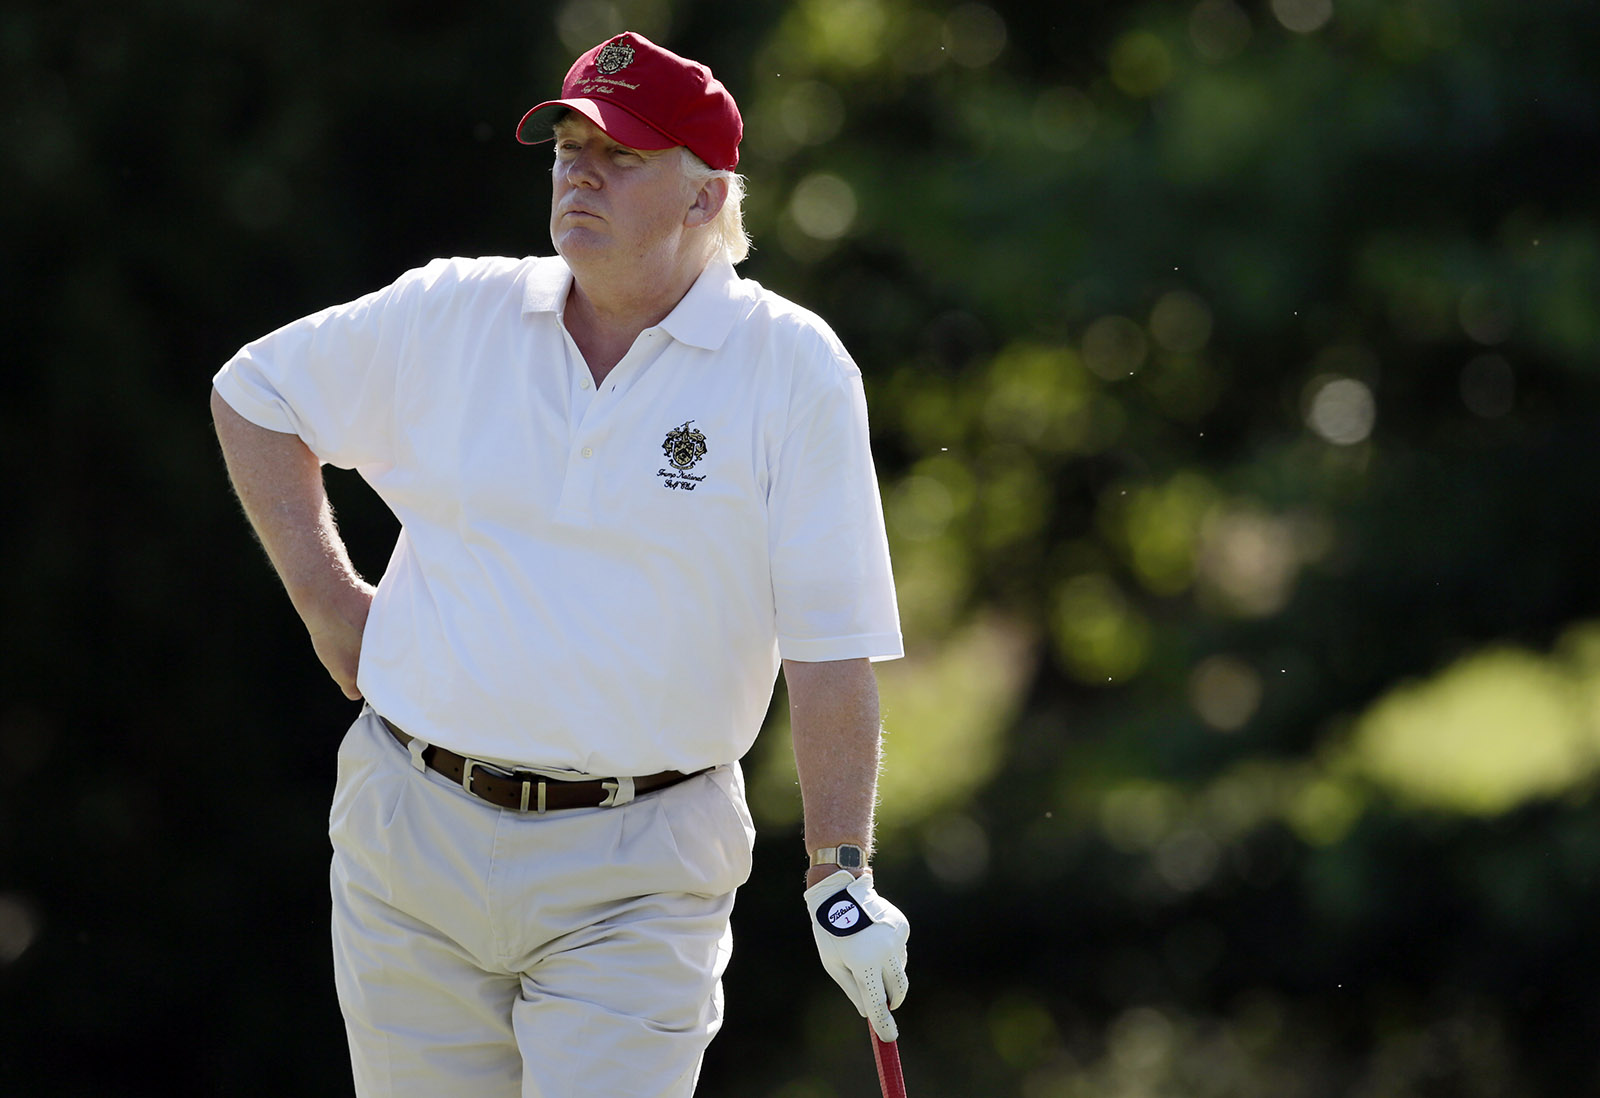 Donald Trump at the Congressional Country Club in Bethesda, Maryland, 2012